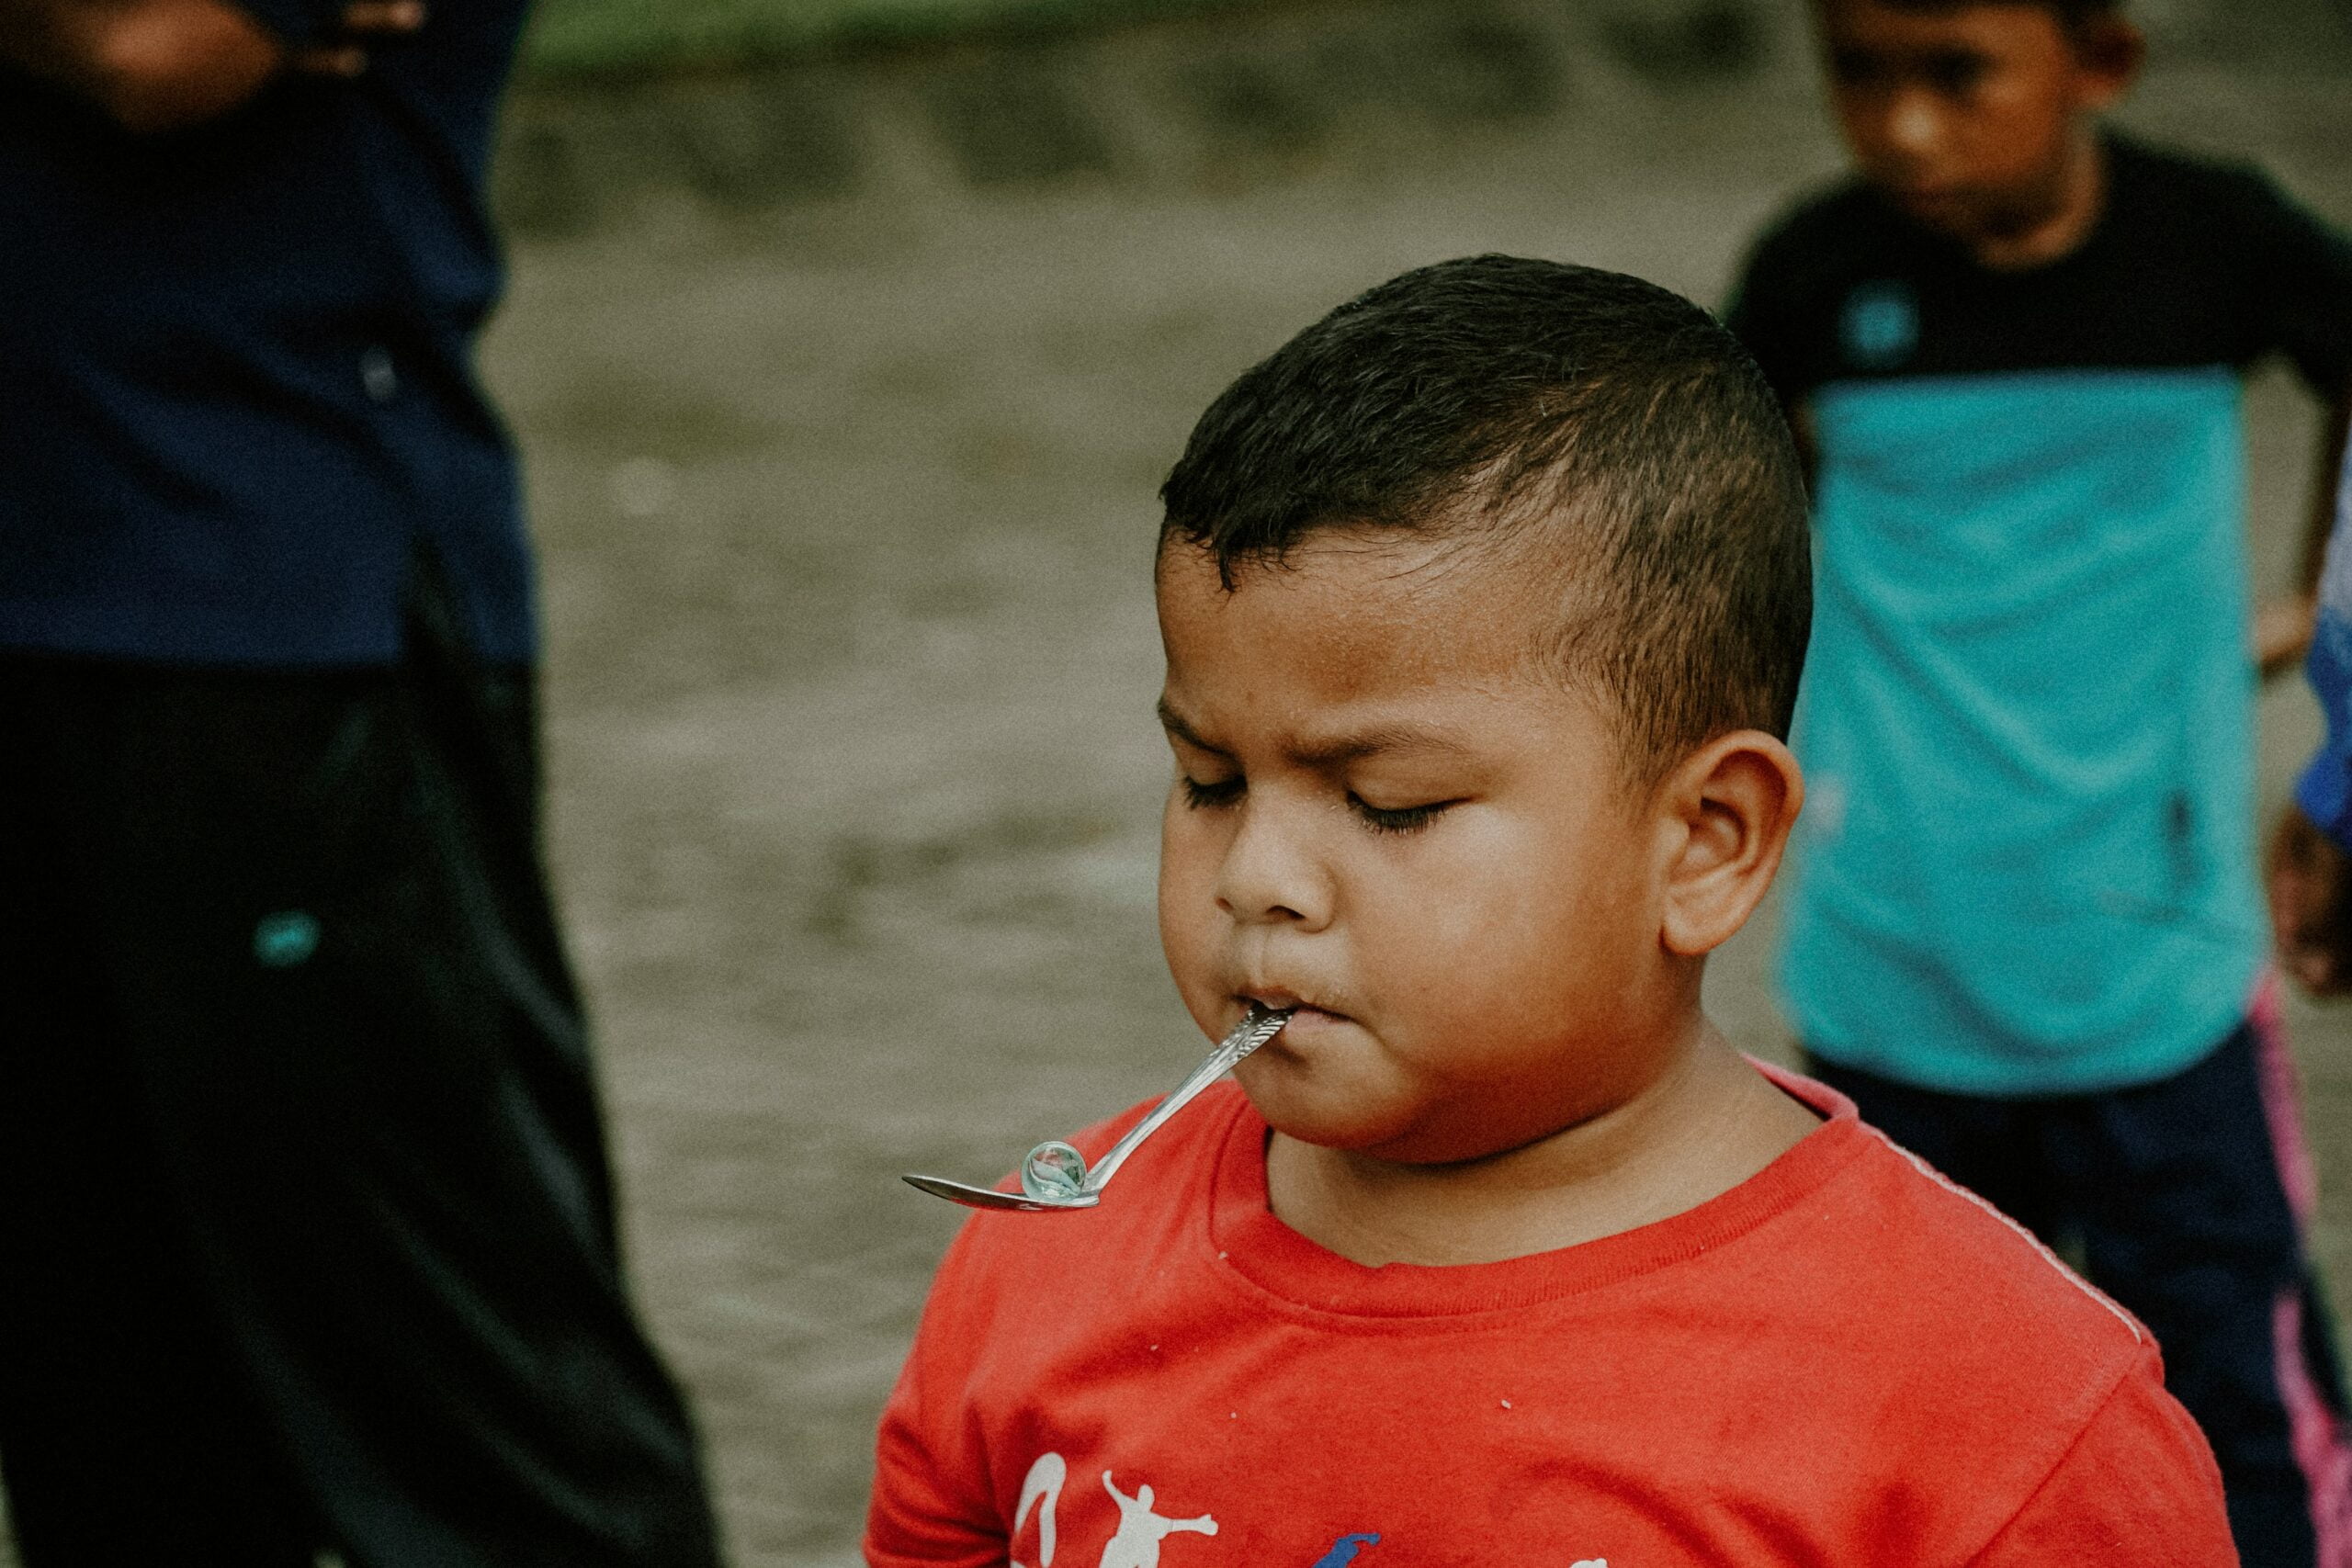 passing down clothes, a young boy with a spoon in his mouth